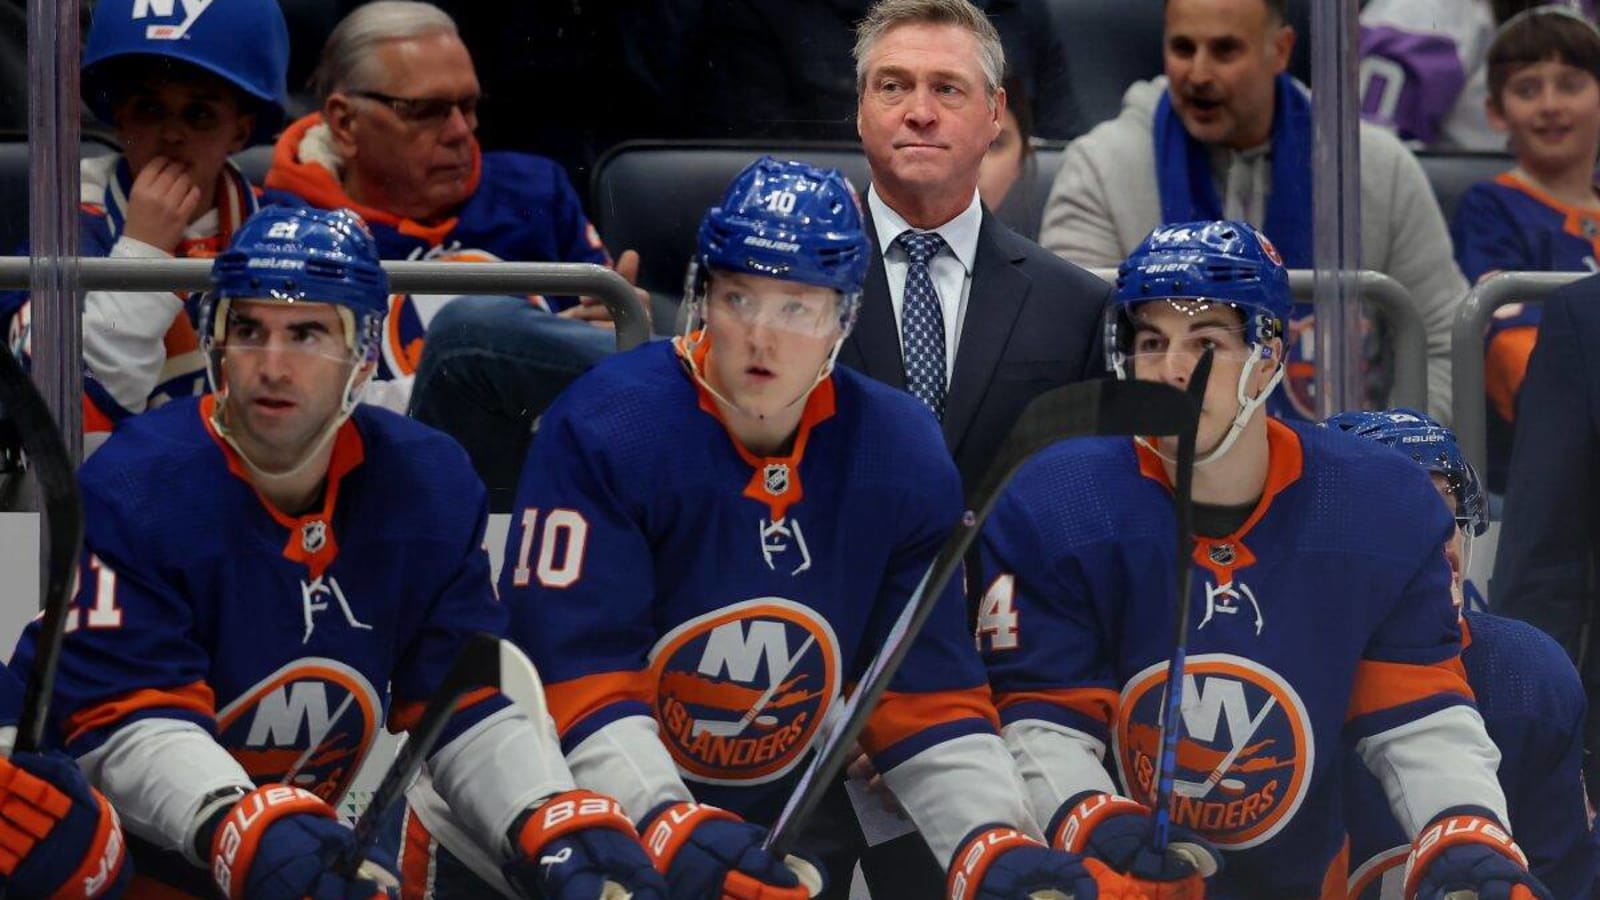 The New York Islanders may have found new life under Patrick Roy